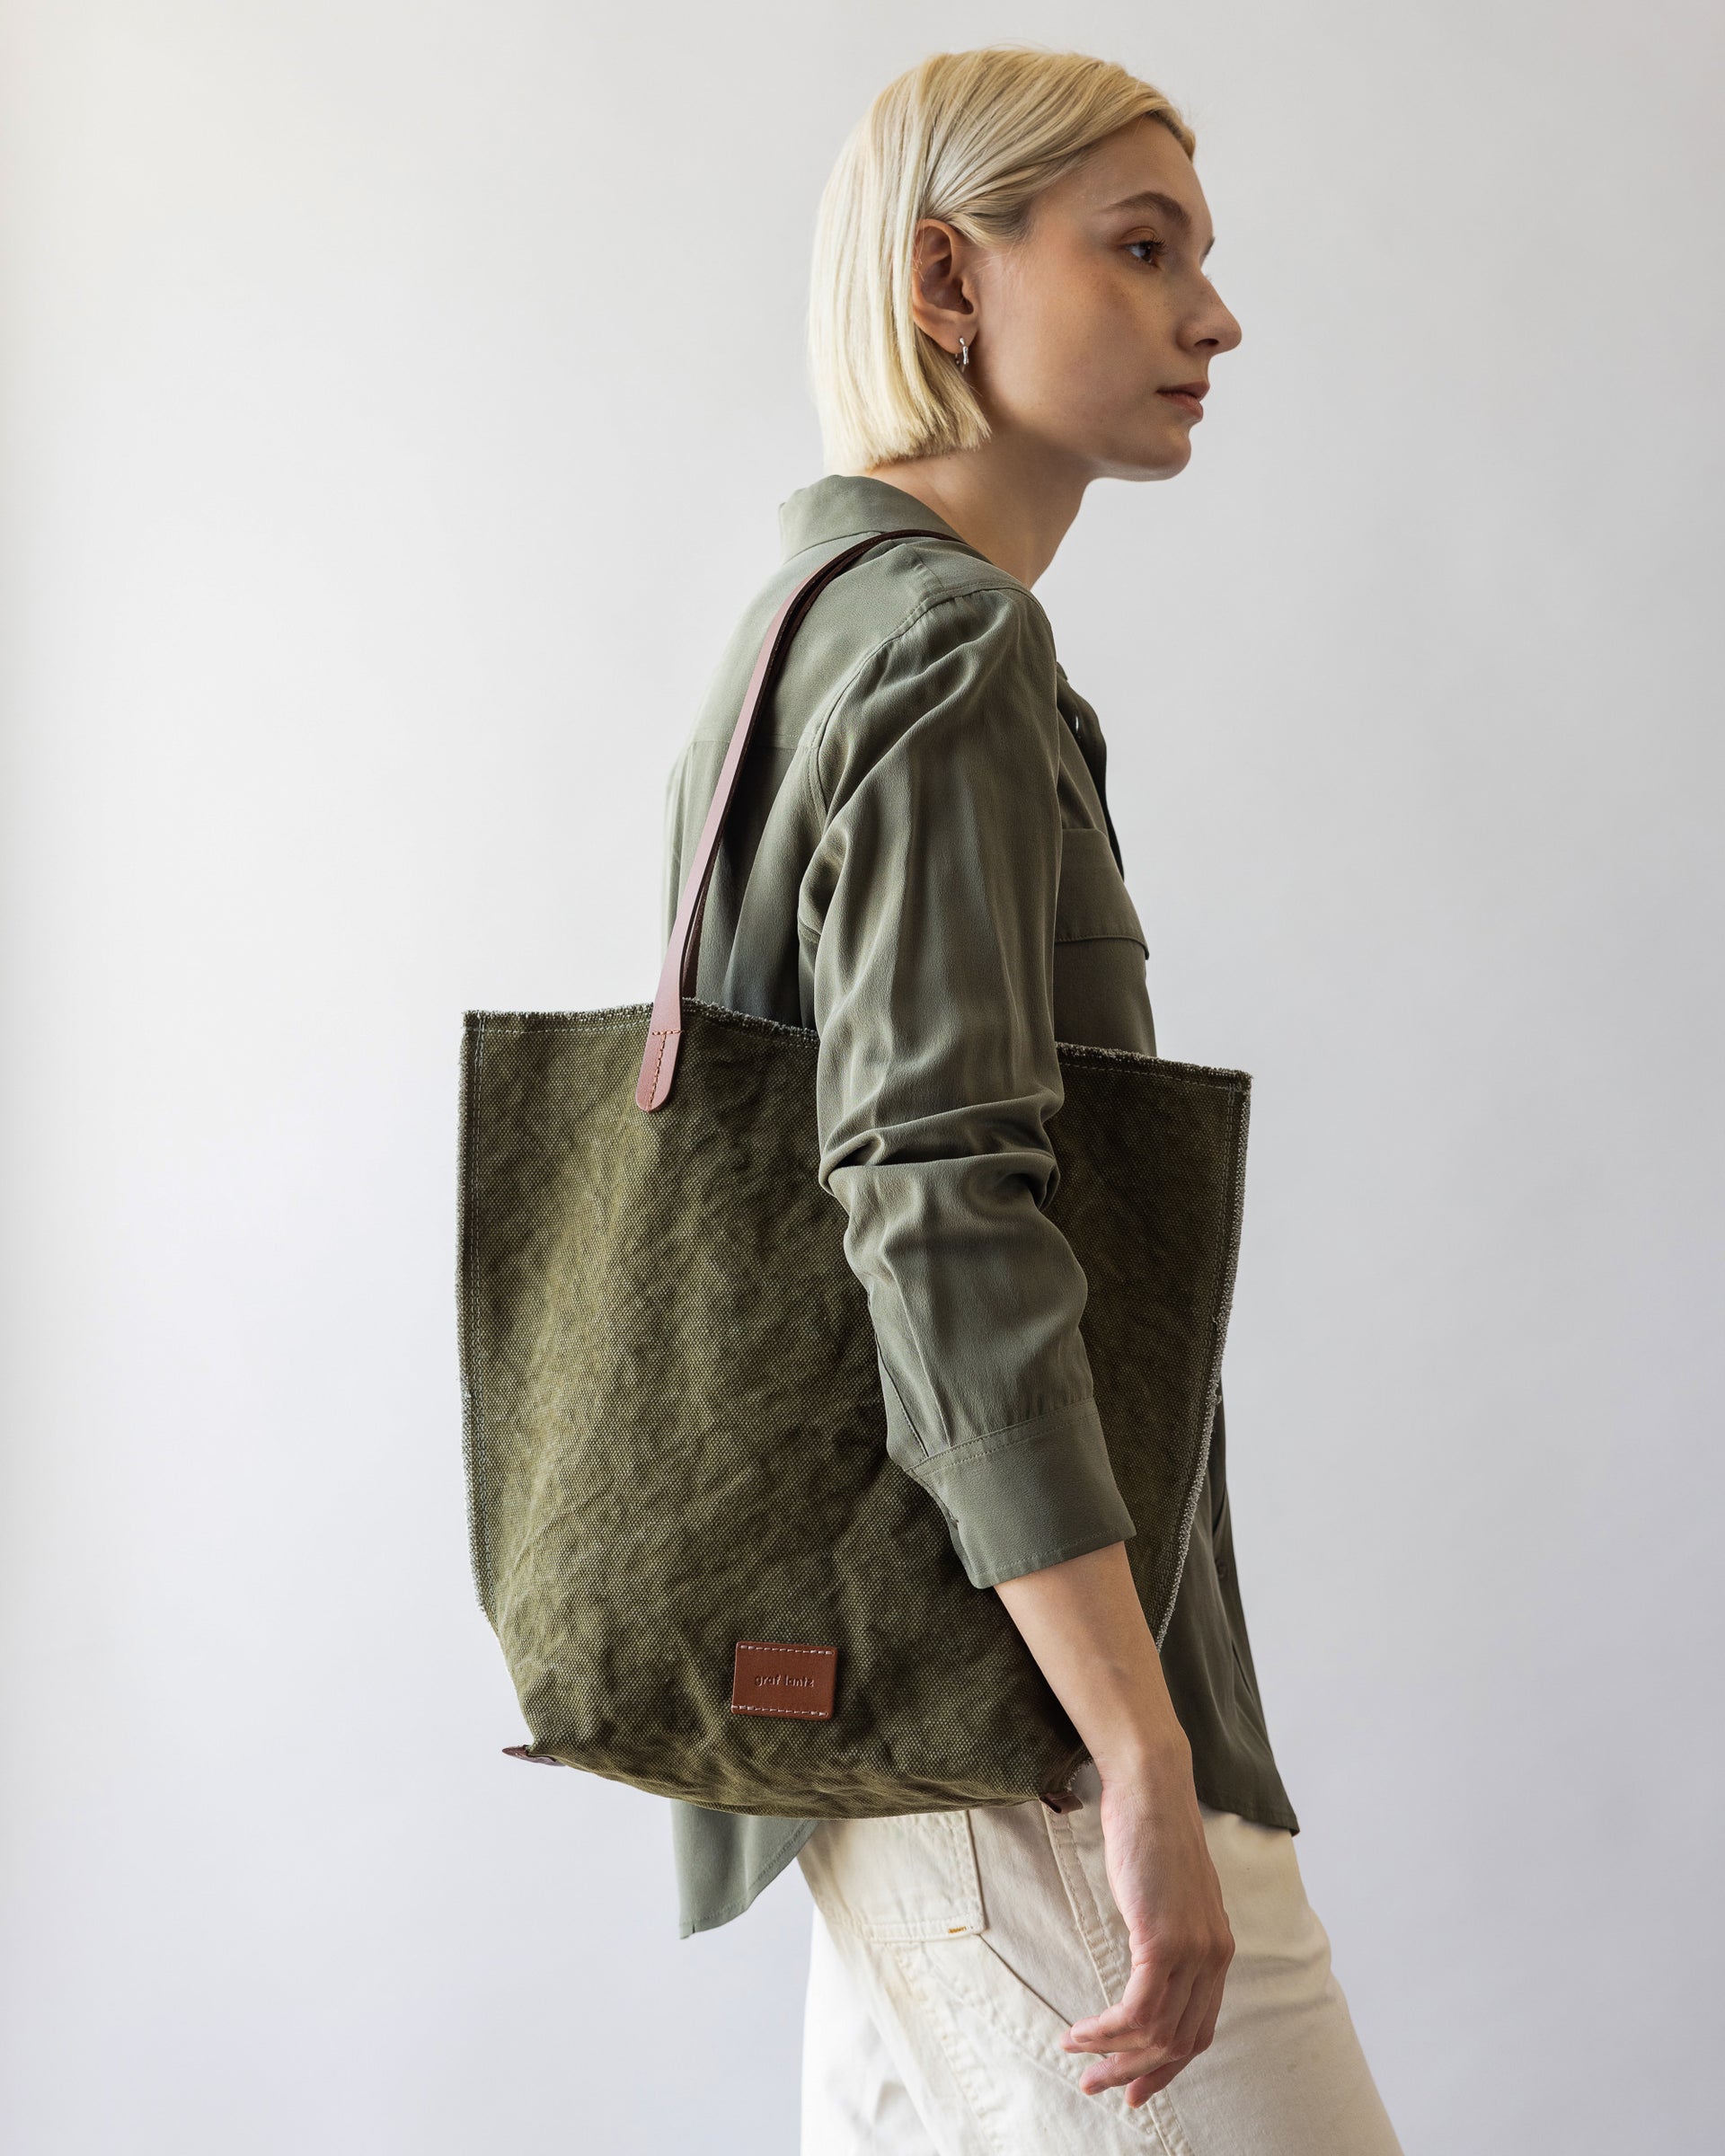 A blonde woman carrying a green Hana Canvas Tote over her shoulder 